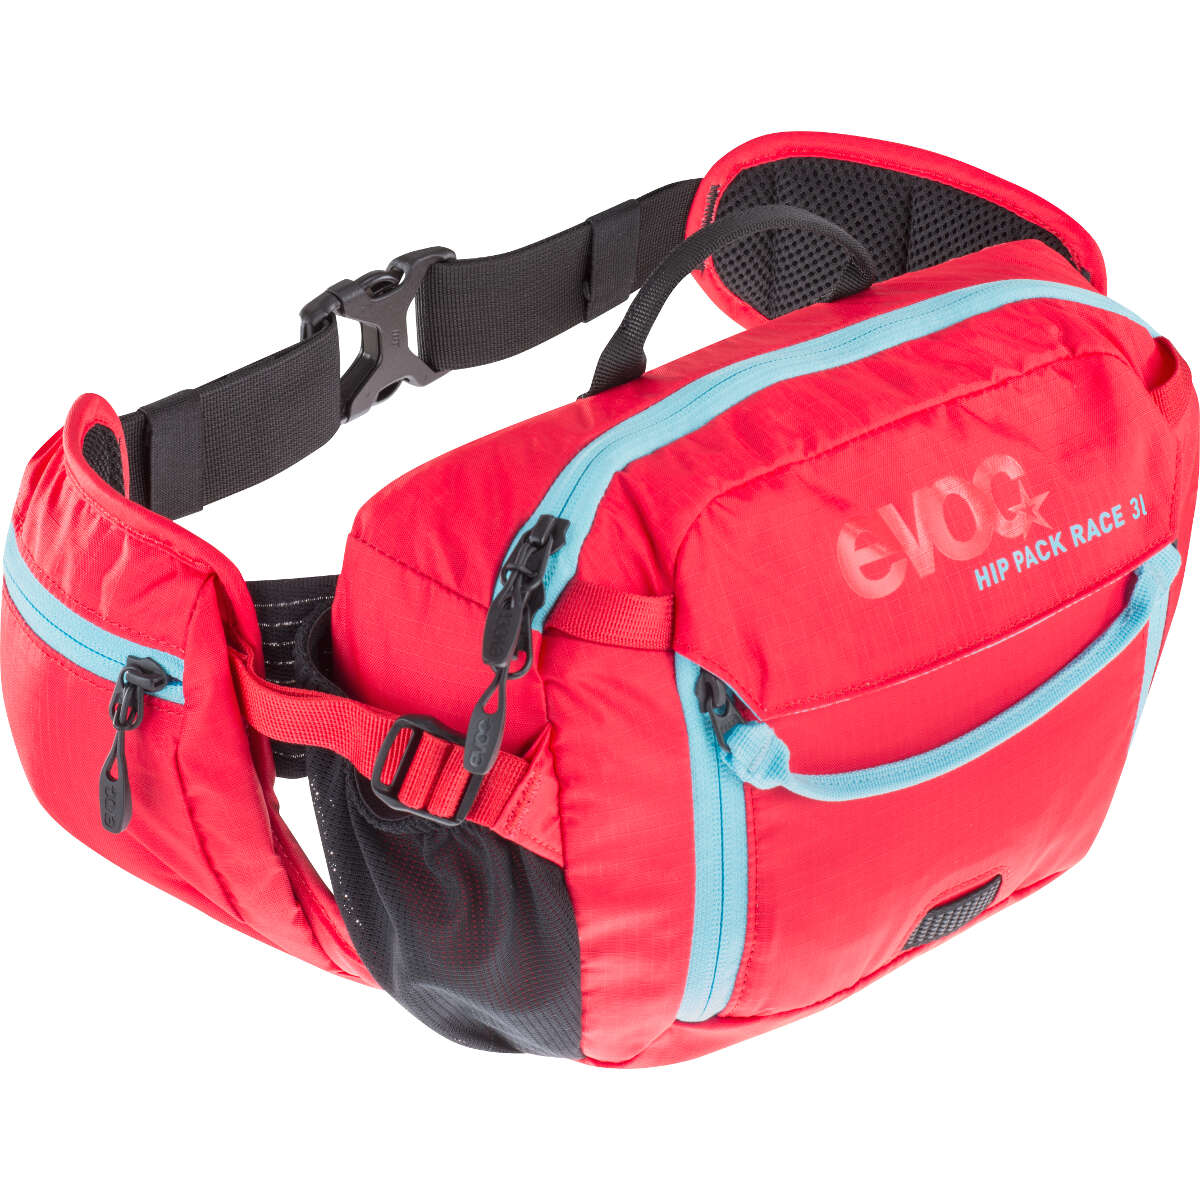 Evoc Hip Pack with Hydration System Hip Pack Race Red/Neon Blue, 3 Liter